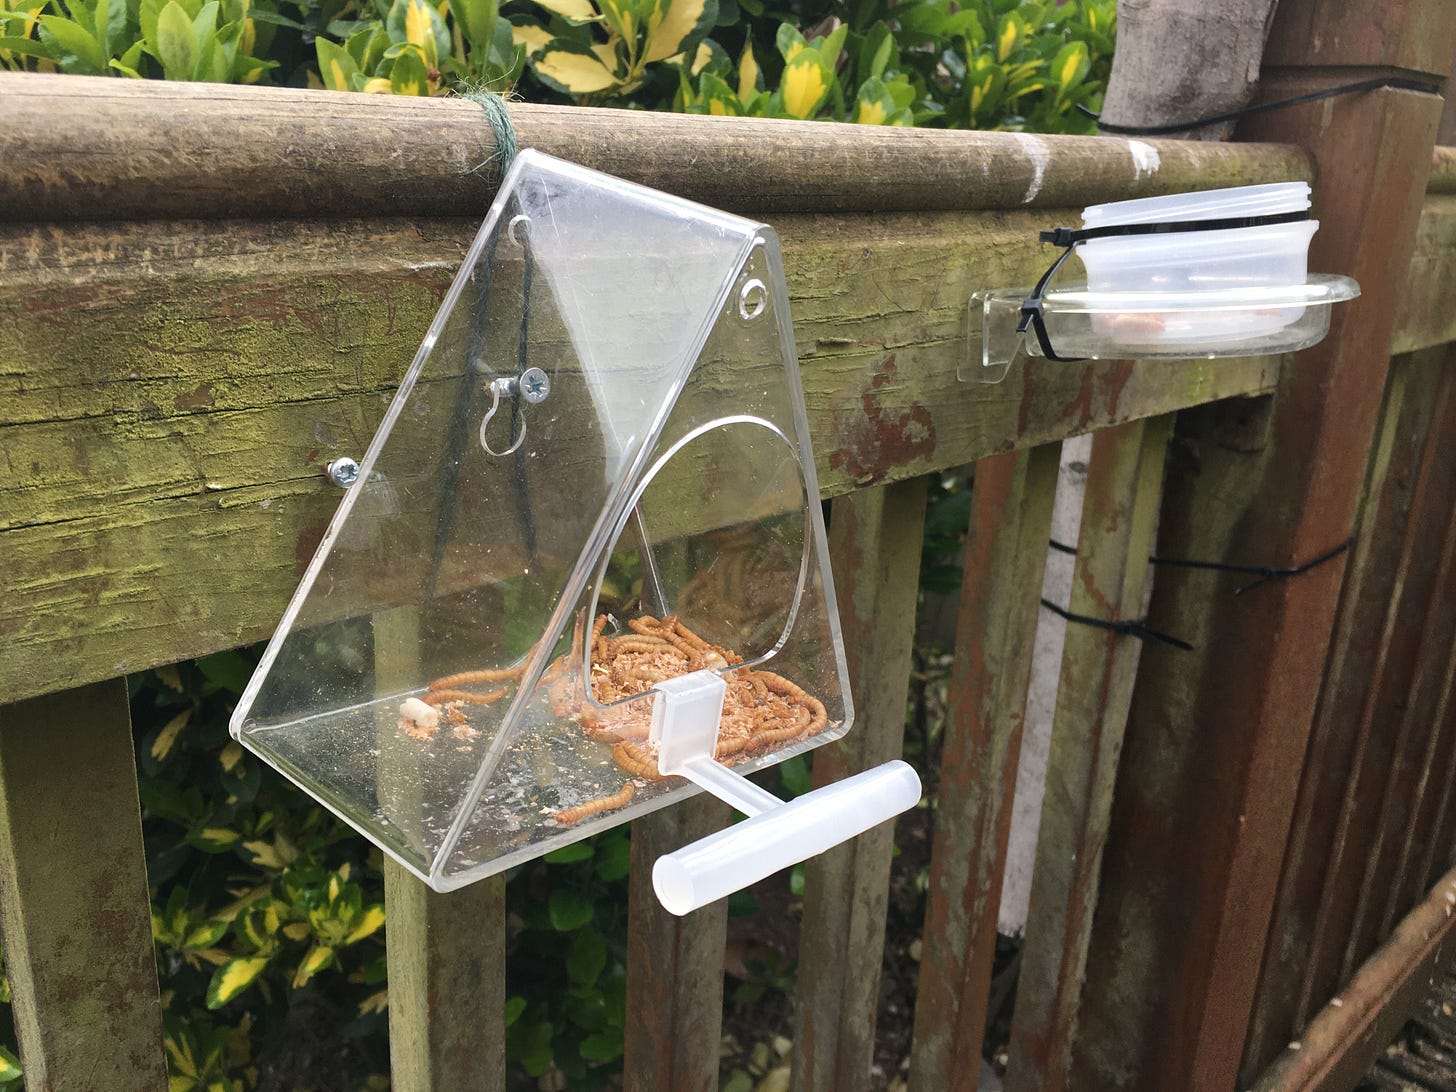 Two plastic mealworm feeders, one in the shape of a triangle, the other an open plastic pot. Both tied to the fence